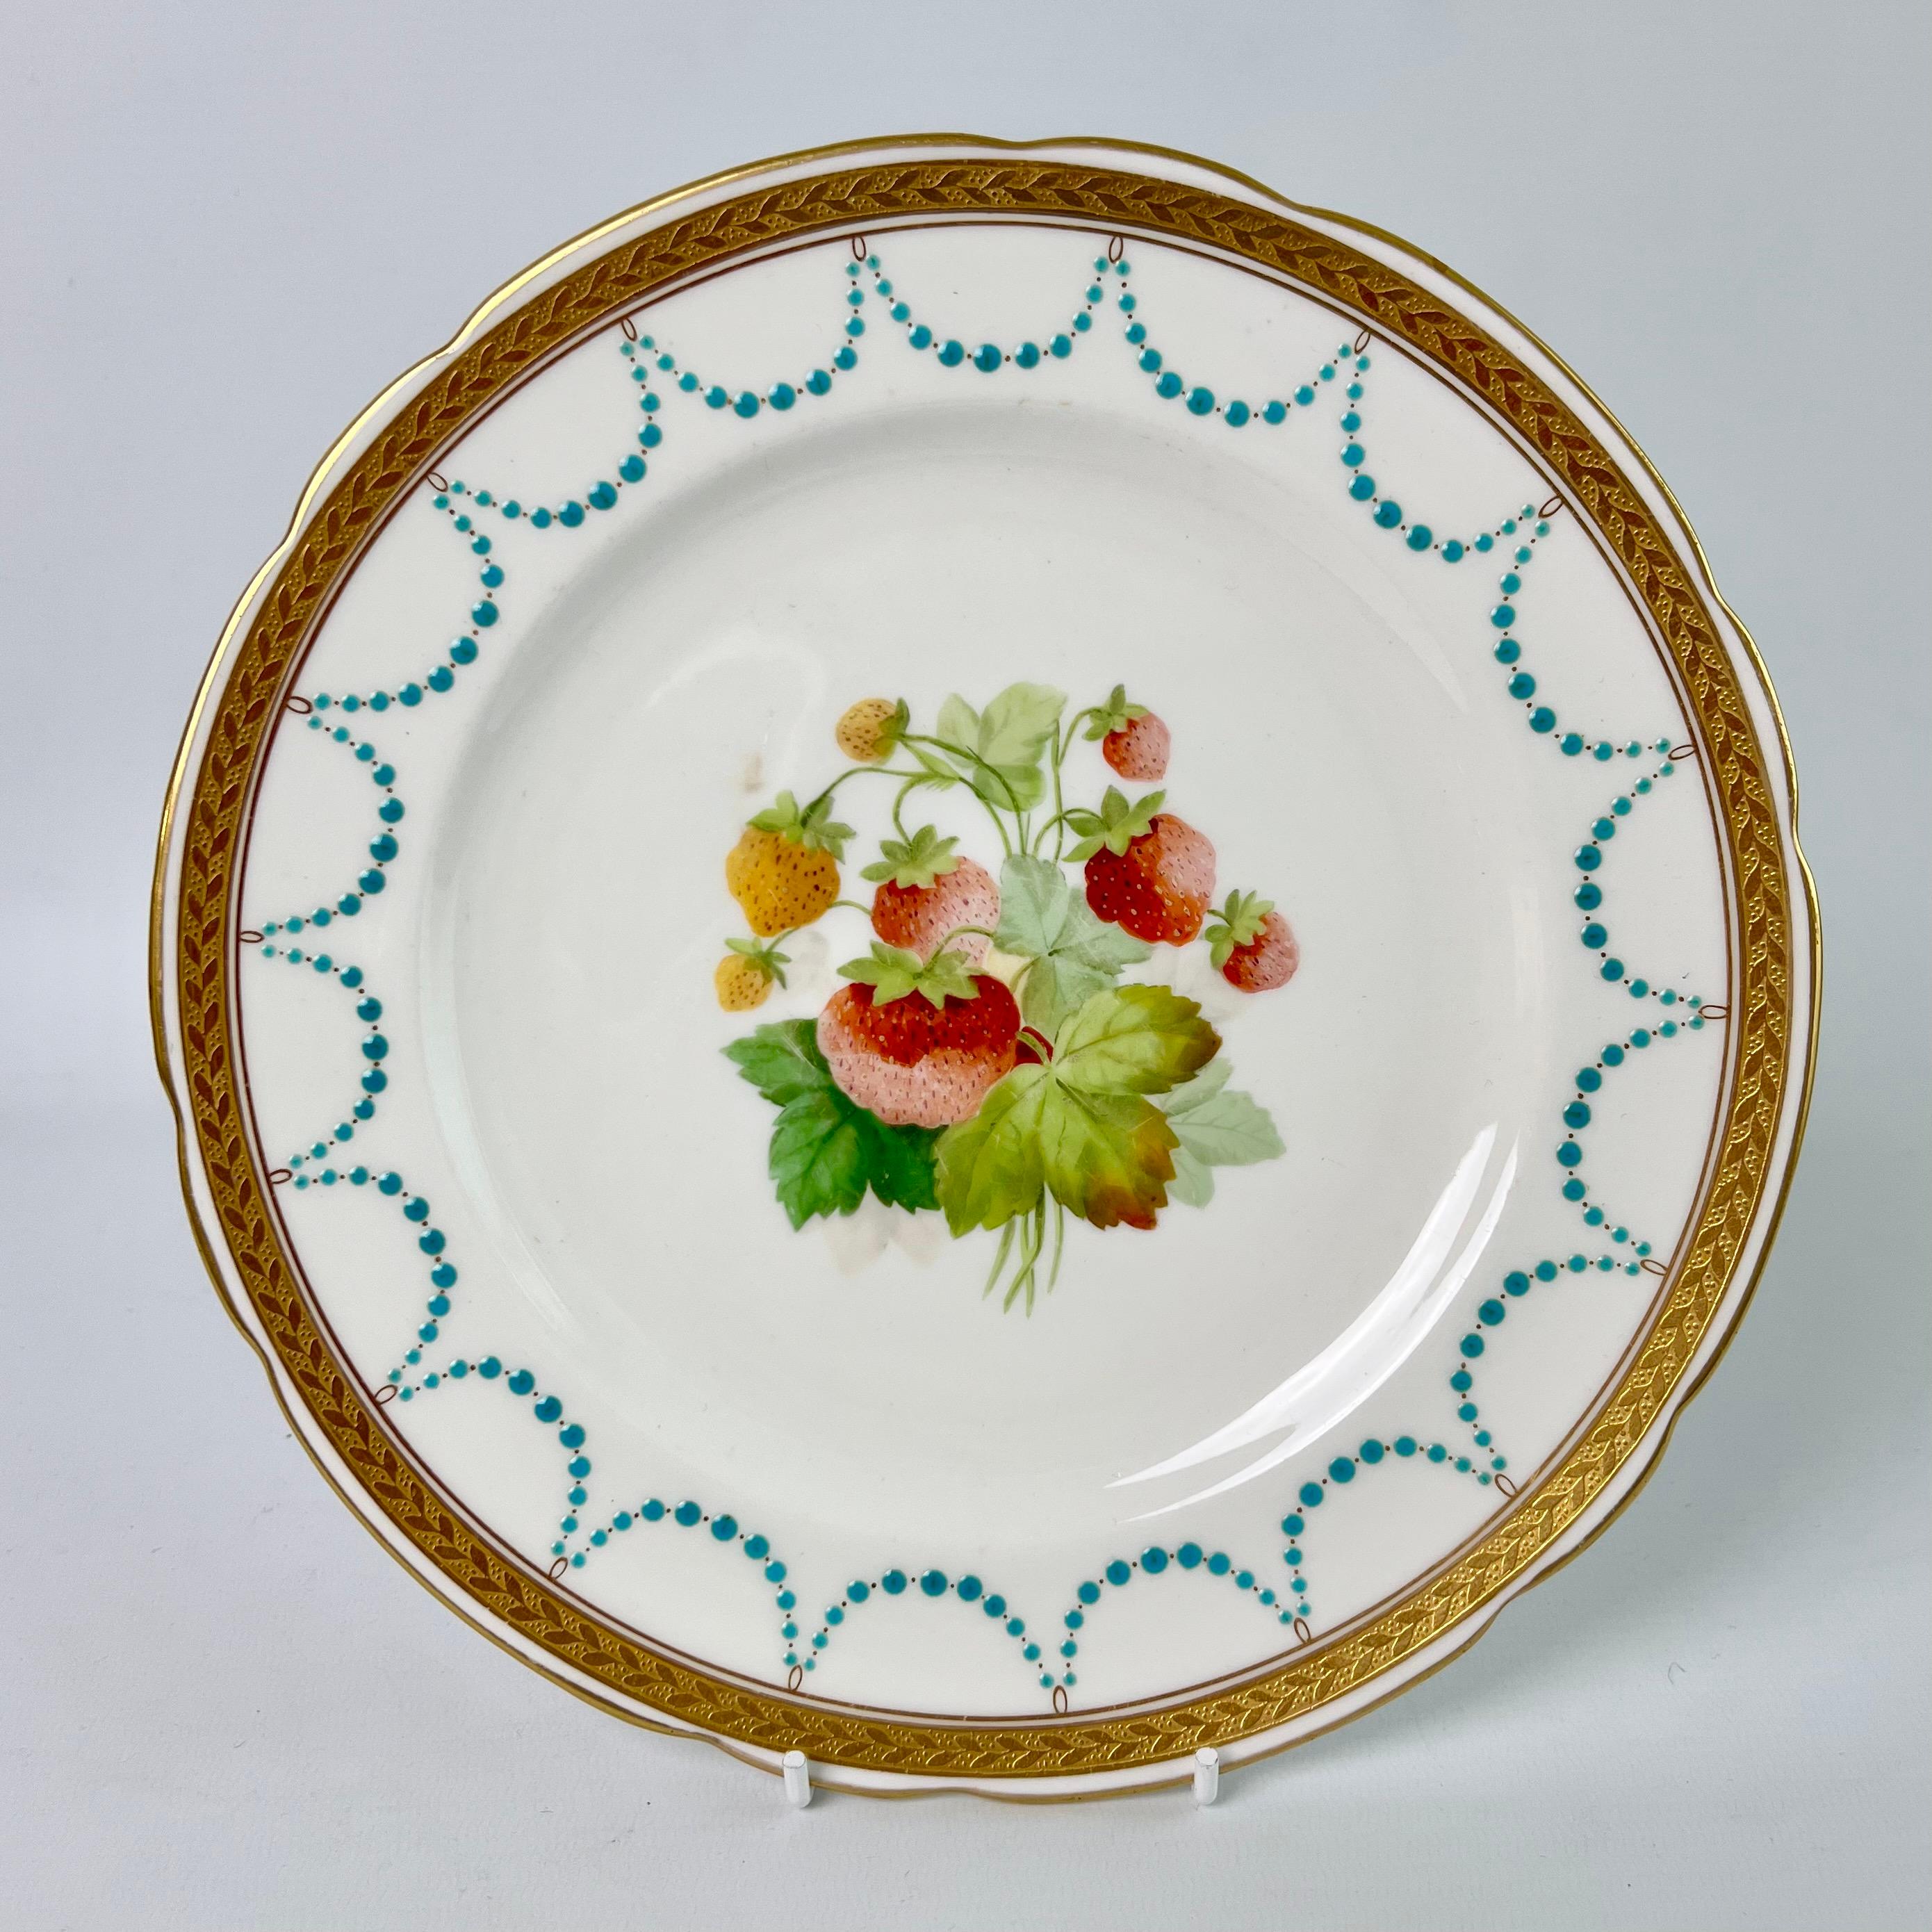 Minton Porcelain Dessert Service, Turquoise and Gilt, Flowers and Fruits, 1870 3